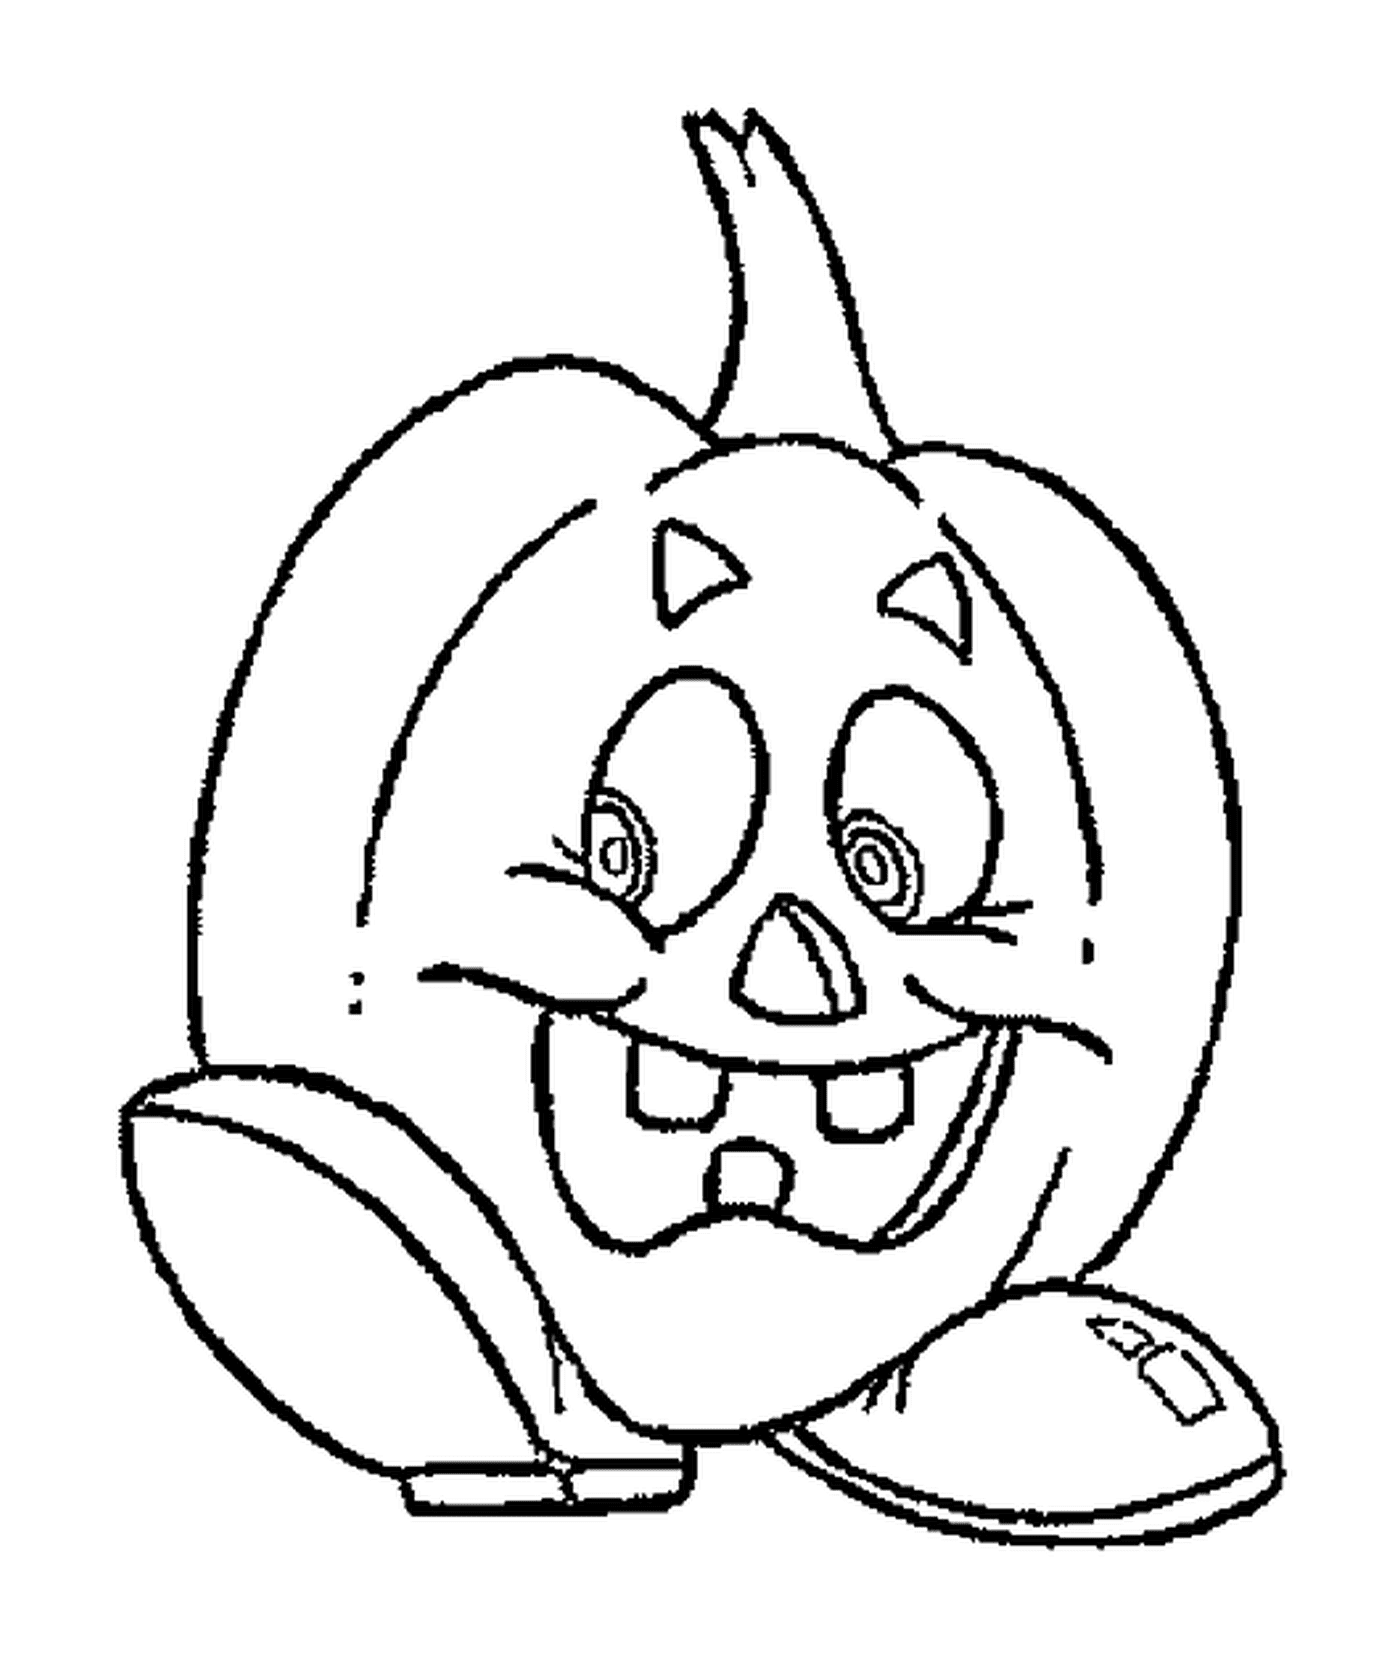  Pumpkin with shoes 